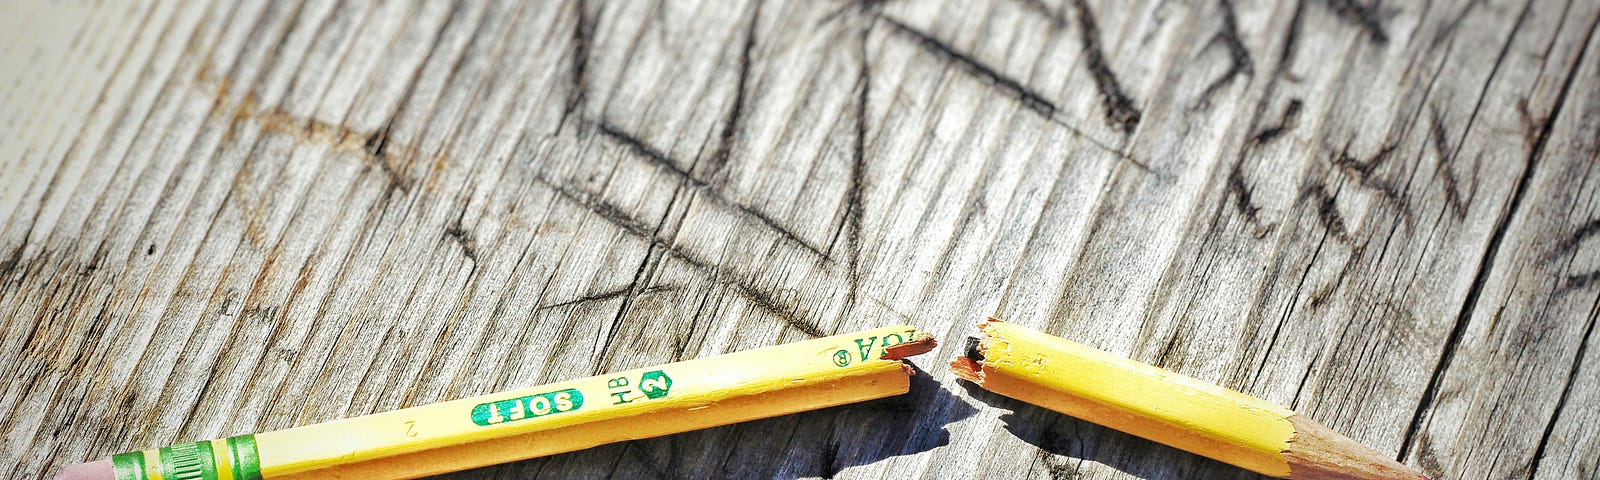 a broken pencil on a wooden table filled with scratch marks